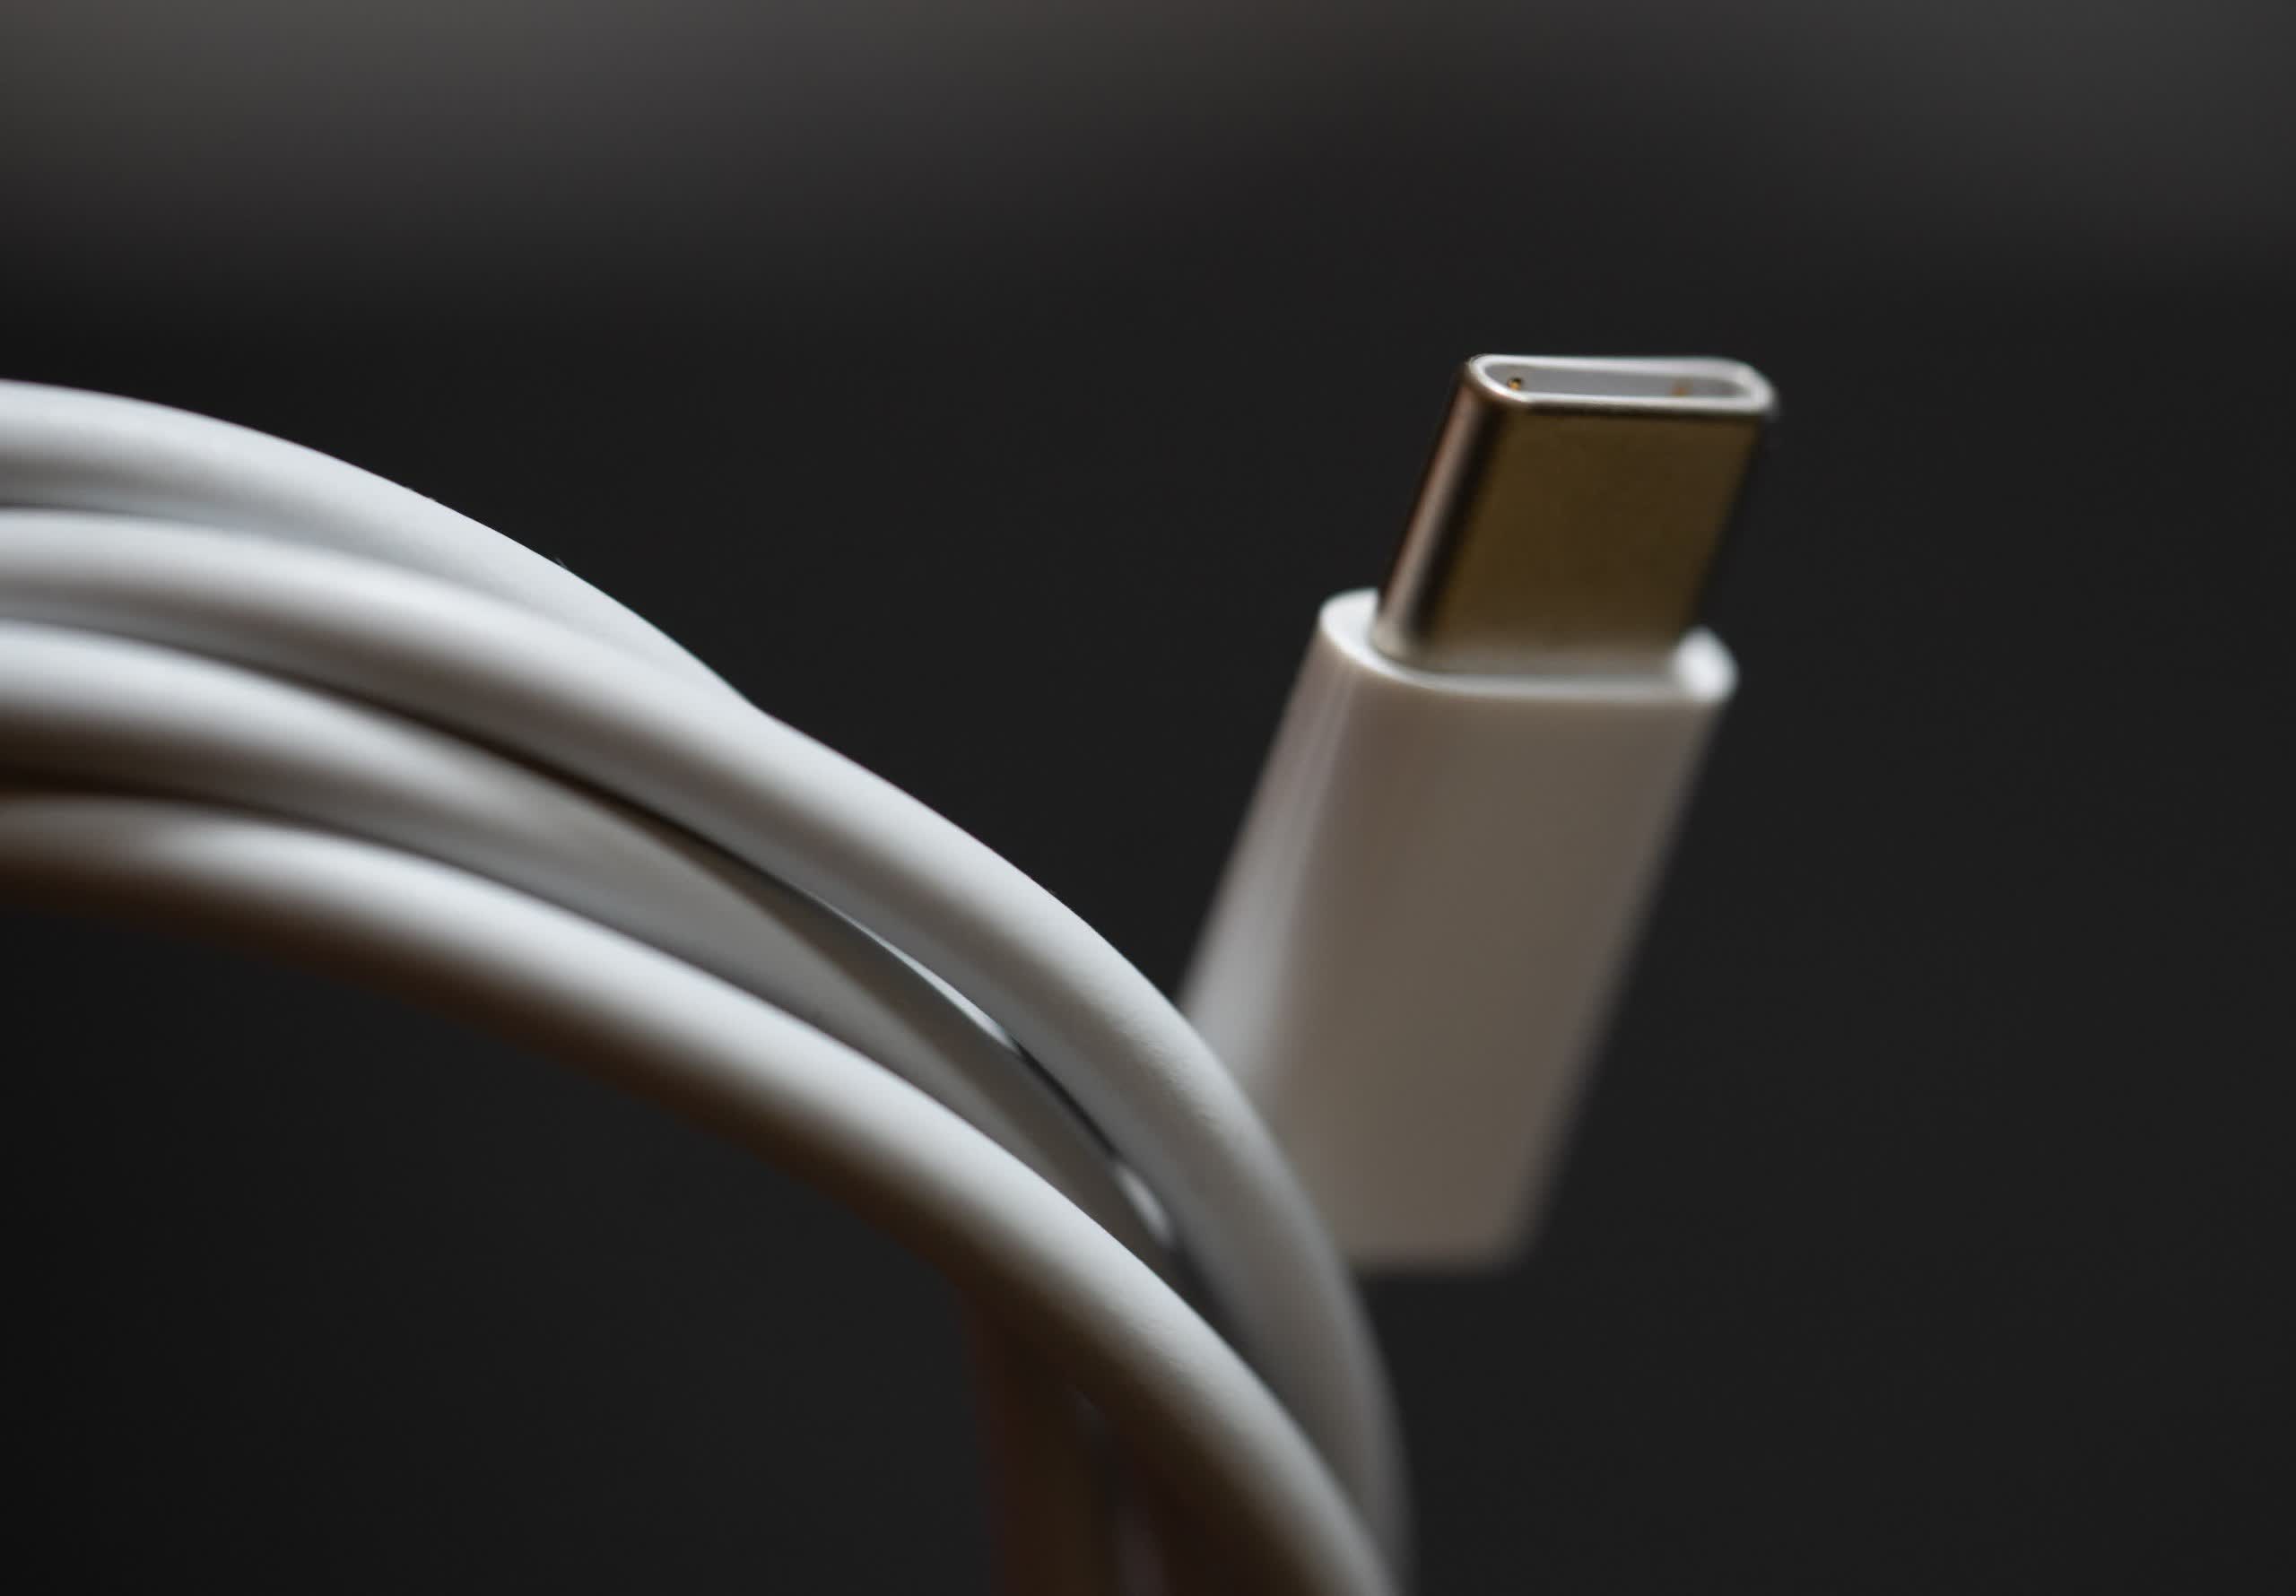 Electronic devices sold in the EU must have USB-C charging ports by 2024